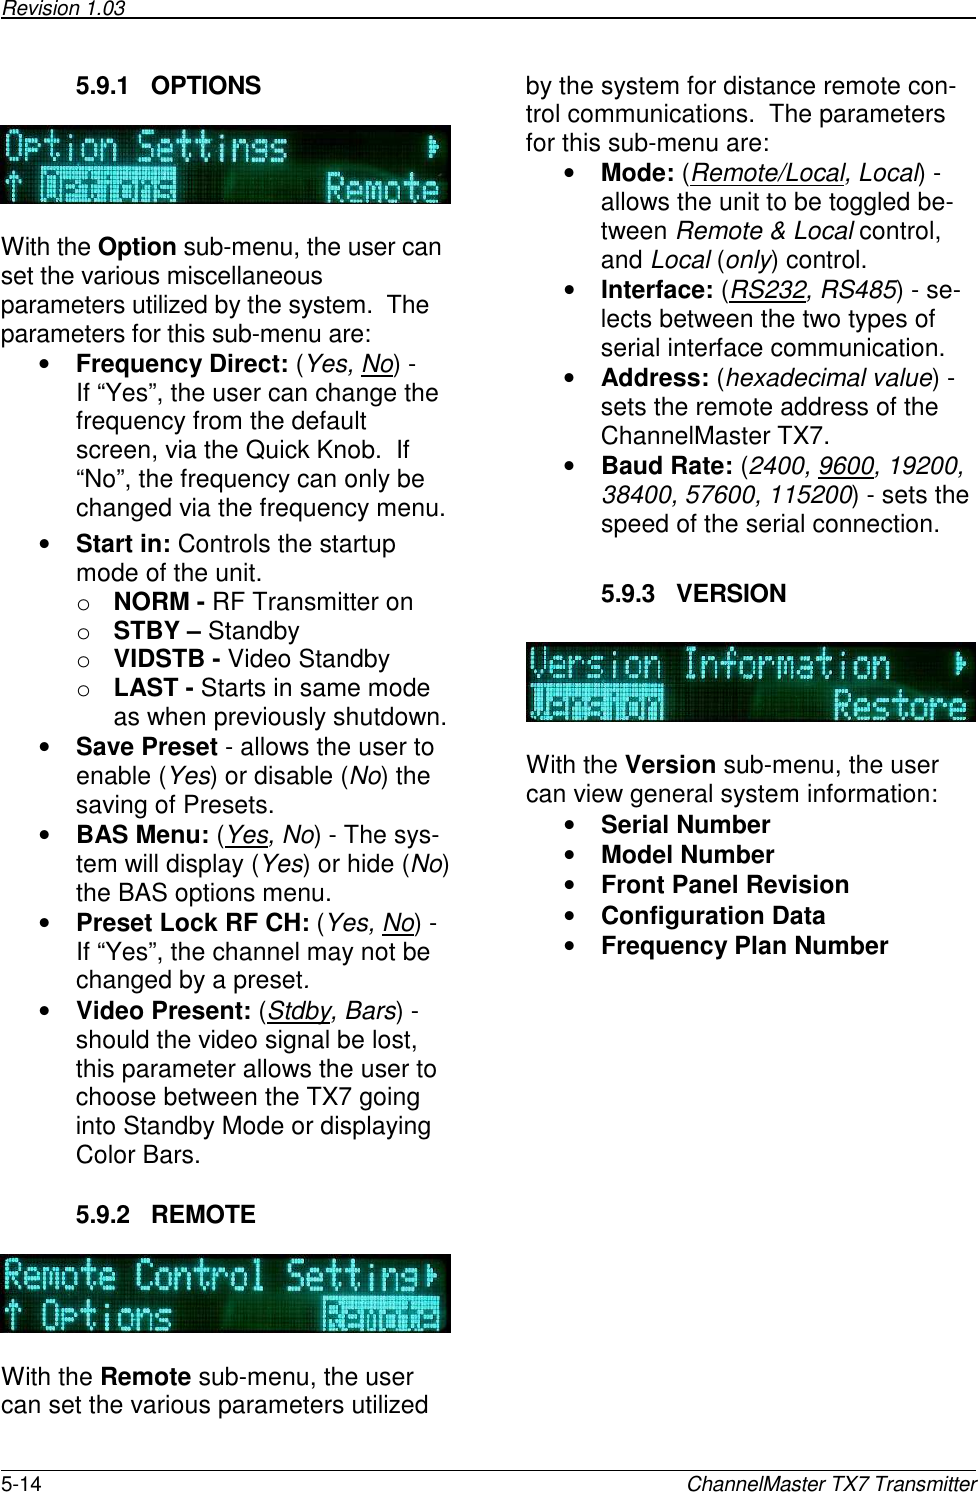 Revision 1.03      5-14  ChannelMaster TX7 Transmitter 5.9.1  OPTIONS    With the Option sub-menu, the user can set the various miscellaneous parameters utilized by the system.  The parameters for this sub-menu are: • Frequency Direct: (Yes, No) -  If “Yes”, the user can change the frequency from the default screen, via the Quick Knob.  If “No”, the frequency can only be changed via the frequency menu. • Start in: Controls the startup mode of the unit. o NORM - RF Transmitter on o STBY – Standby o VIDSTB - Video Standby o LAST - Starts in same mode as when previously shutdown. • Save Preset - allows the user to enable (Yes) or disable (No) the saving of Presets. • BAS Menu: (Yes, No) - The sys-tem will display (Yes) or hide (No) the BAS options menu. • Preset Lock RF CH: (Yes, No) - If “Yes”, the channel may not be changed by a preset.  • Video Present: (Stdby, Bars) - should the video signal be lost, this parameter allows the user to choose between the TX7 going into Standby Mode or displaying Color Bars.   5.9.2  REMOTE    With the Remote sub-menu, the user can set the various parameters utilized by the system for distance remote con-trol communications.  The parameters for this sub-menu are: • Mode: (Remote/Local, Local) - allows the unit to be toggled be-tween Remote &amp; Local control, and Local (only) control. • Interface: (RS232, RS485) - se-lects between the two types of serial interface communication. • Address: (hexadecimal value) - sets the remote address of the ChannelMaster TX7. • Baud Rate: (2400, 9600, 19200, 38400, 57600, 115200) - sets the speed of the serial connection.  5.9.3  VERSION    With the Version sub-menu, the user can view general system information: • Serial Number • Model Number • Front Panel Revision • Configuration Data • Frequency Plan Number 